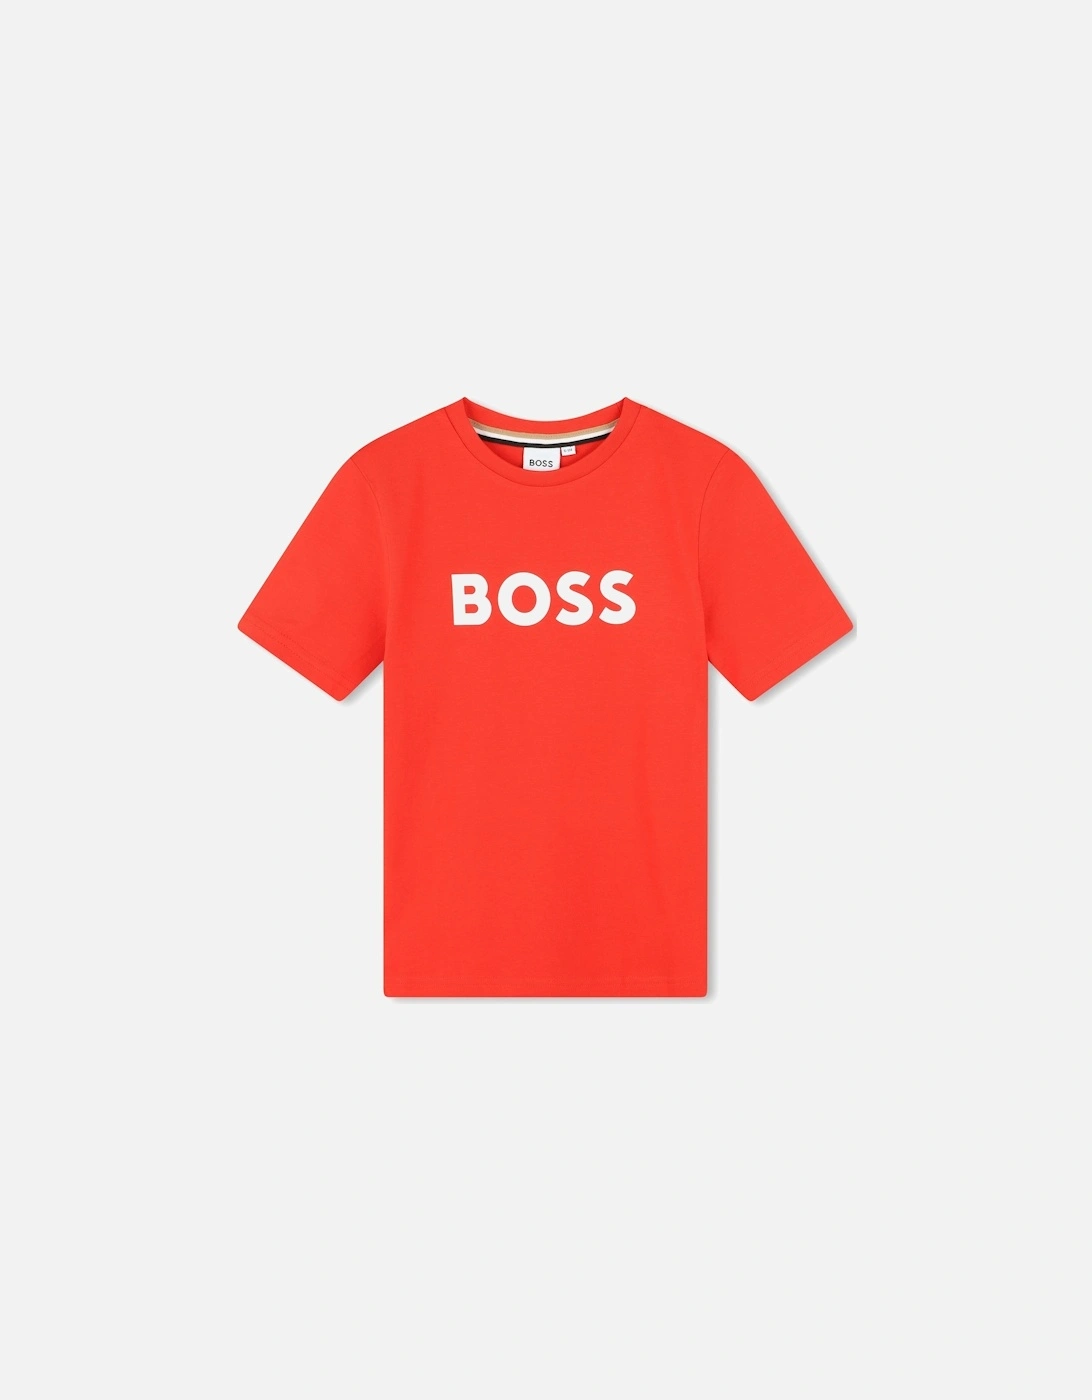 BOYS BRIGHT RED T SHIRT, 3 of 2